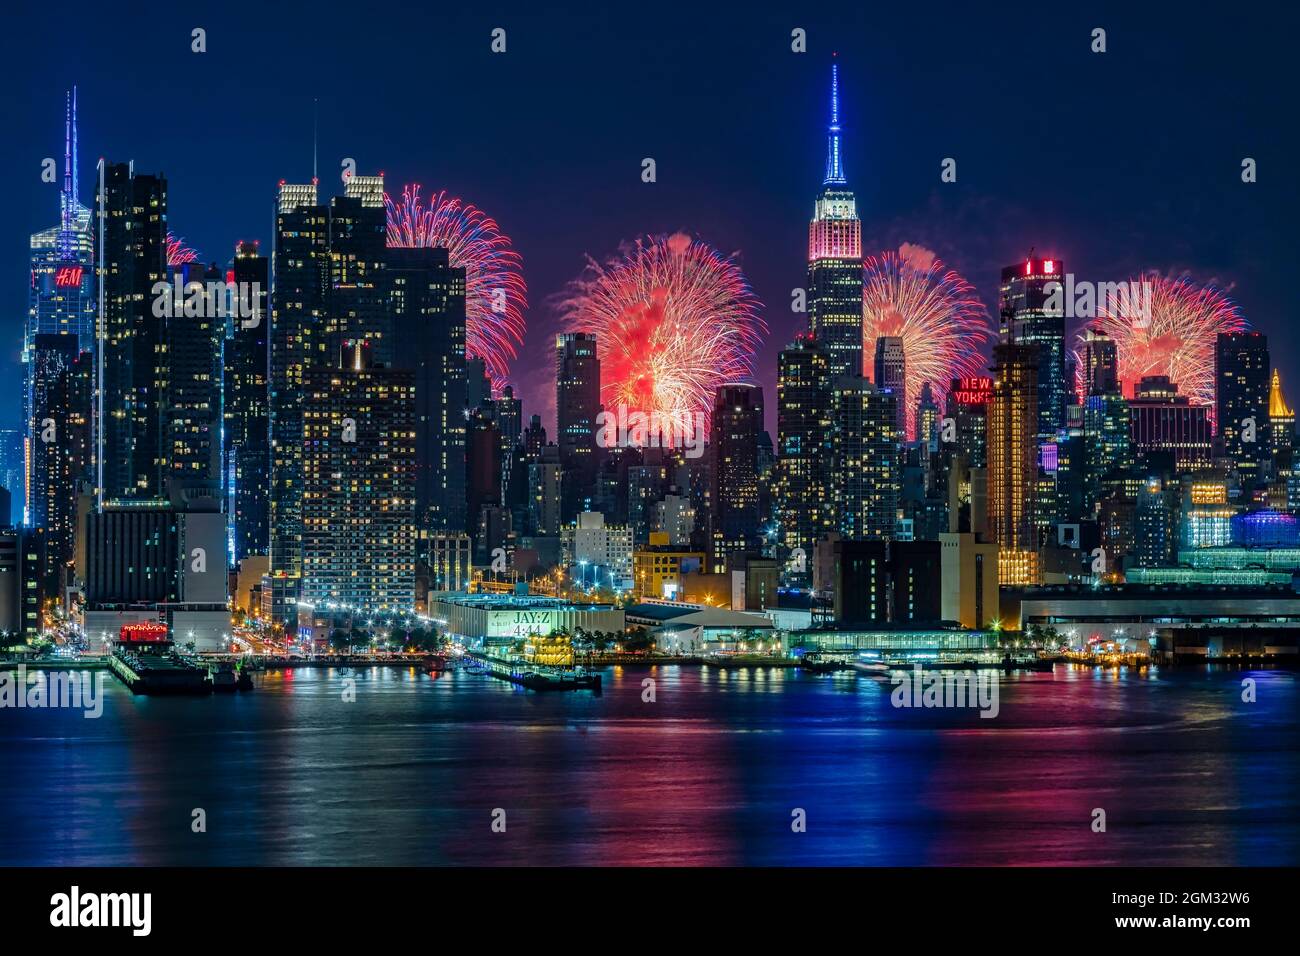 NYC Fireworks Celebration -  New York City skyline with the Macy's Spectacular 4th of July Fireworks Celebration Show as a backdrop to midtown Manhatt Stock Photo